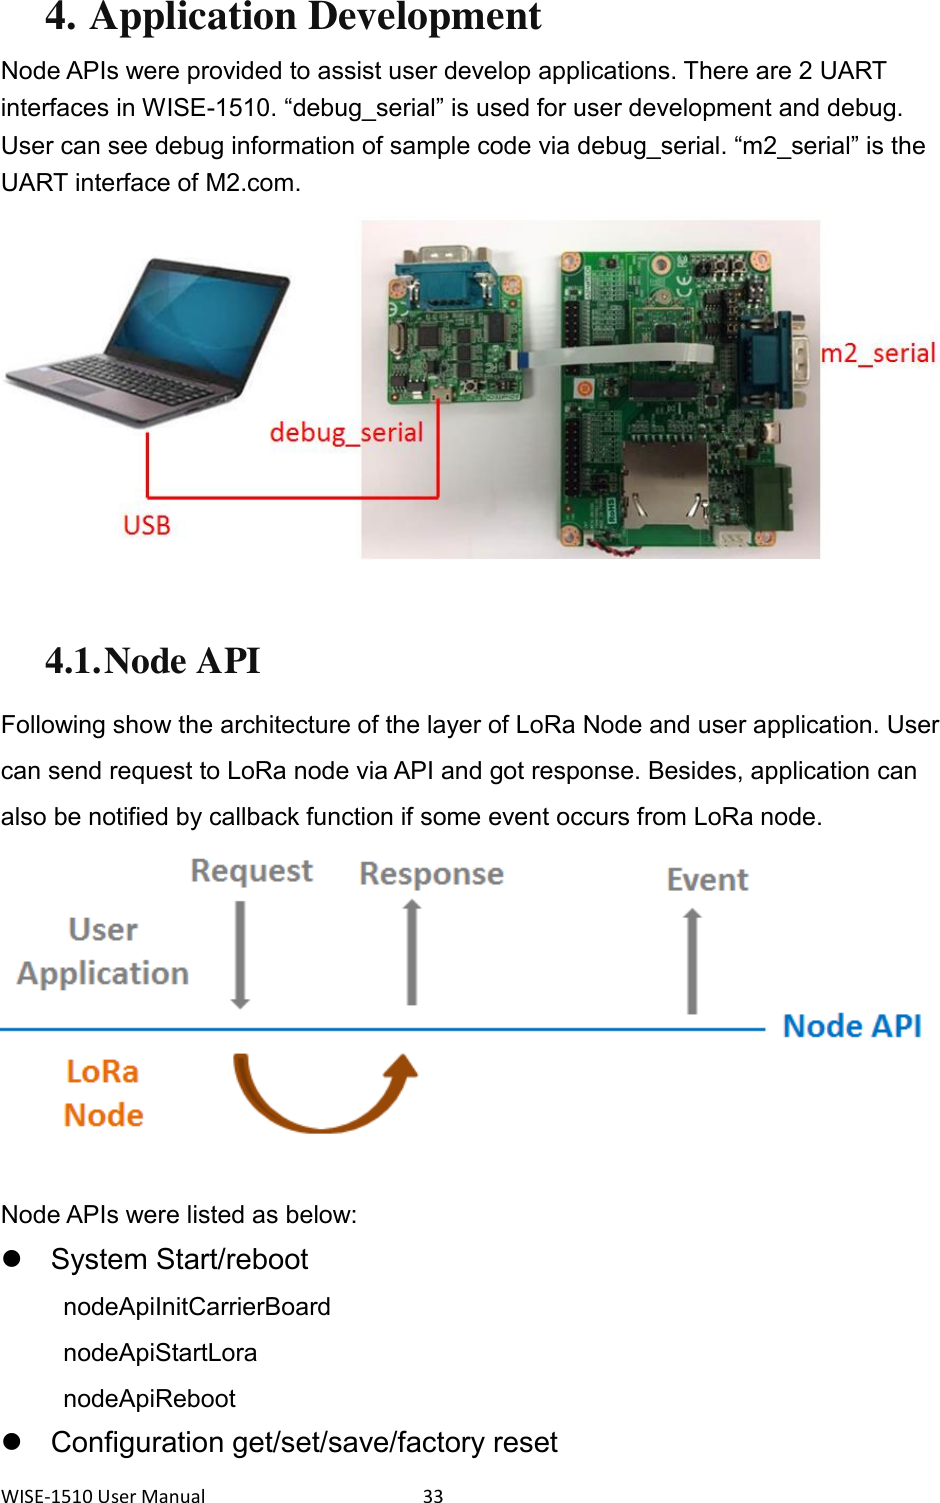 WISE-1510 User Manual  33 4. Application Development Node APIs were provided to assist user develop applications. There are 2 UART interfaces in WISE-1510. “debug_serial” is used for user development and debug. User can see debug information of sample code via debug_serial. “m2_serial” is the UART interface of M2.com.     4.1. Node API Following show the architecture of the layer of LoRa Node and user application. User can send request to LoRa node via API and got response. Besides, application can also be notified by callback function if some event occurs from LoRa node.    Node APIs were listed as below:   System Start/reboot nodeApiInitCarrierBoard nodeApiStartLora   nodeApiReboot   Configuration get/set/save/factory reset 